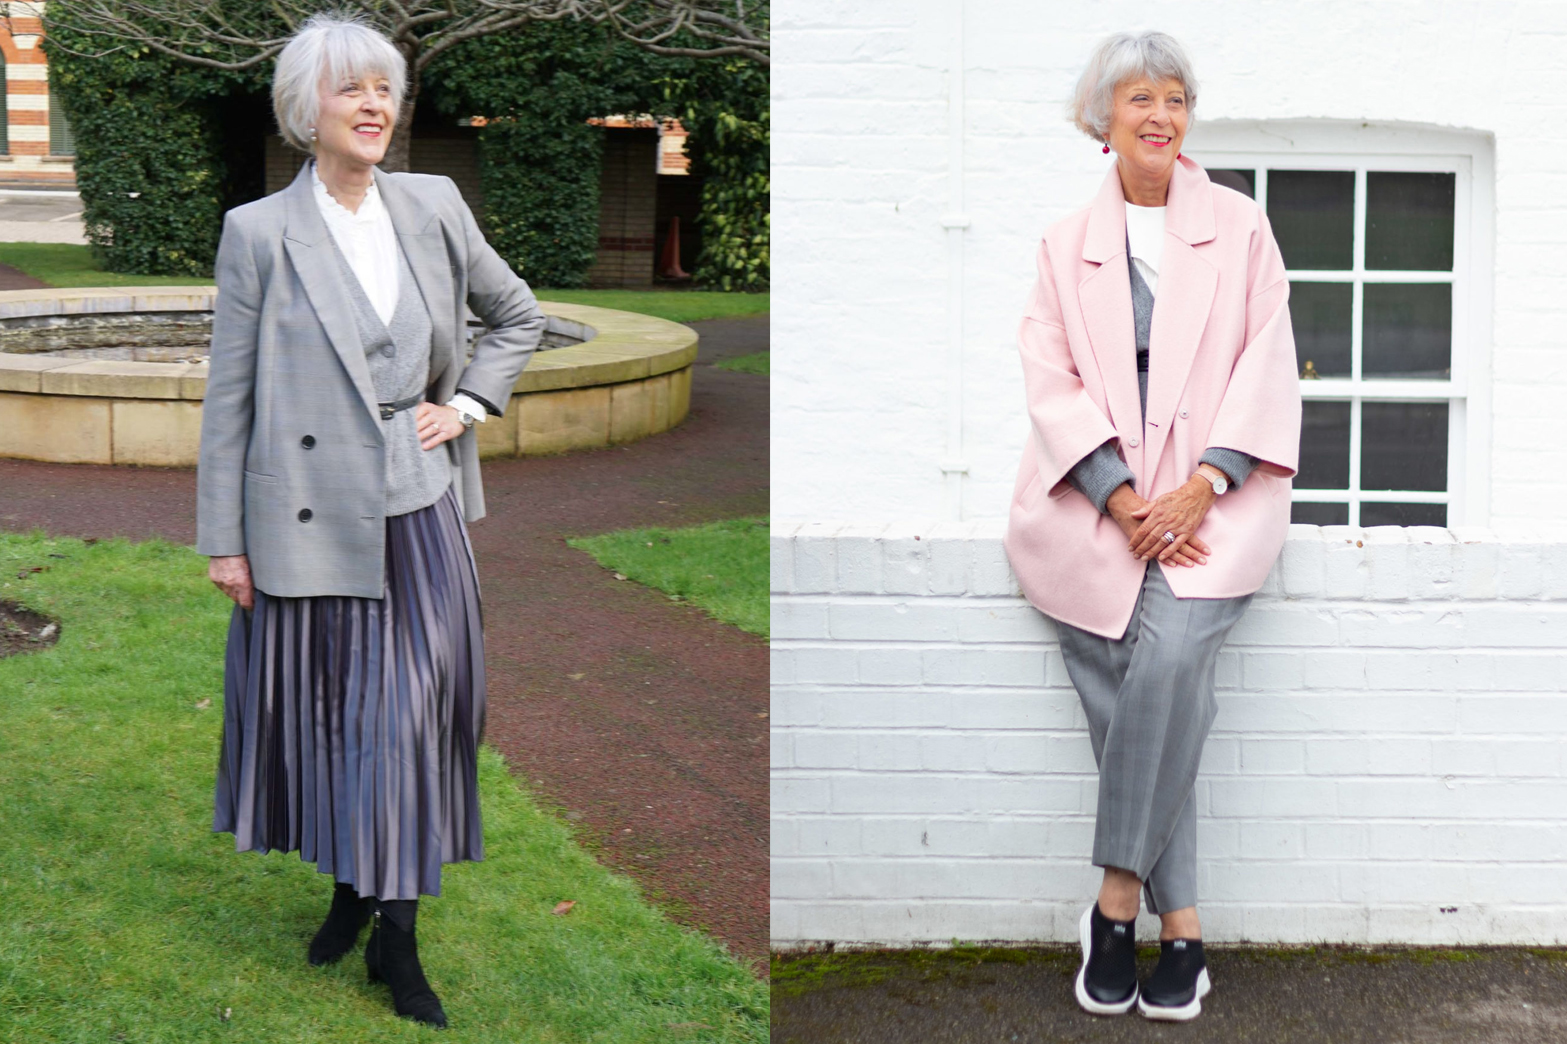 Chic is the Word today on the blog. The Chic at Every Age